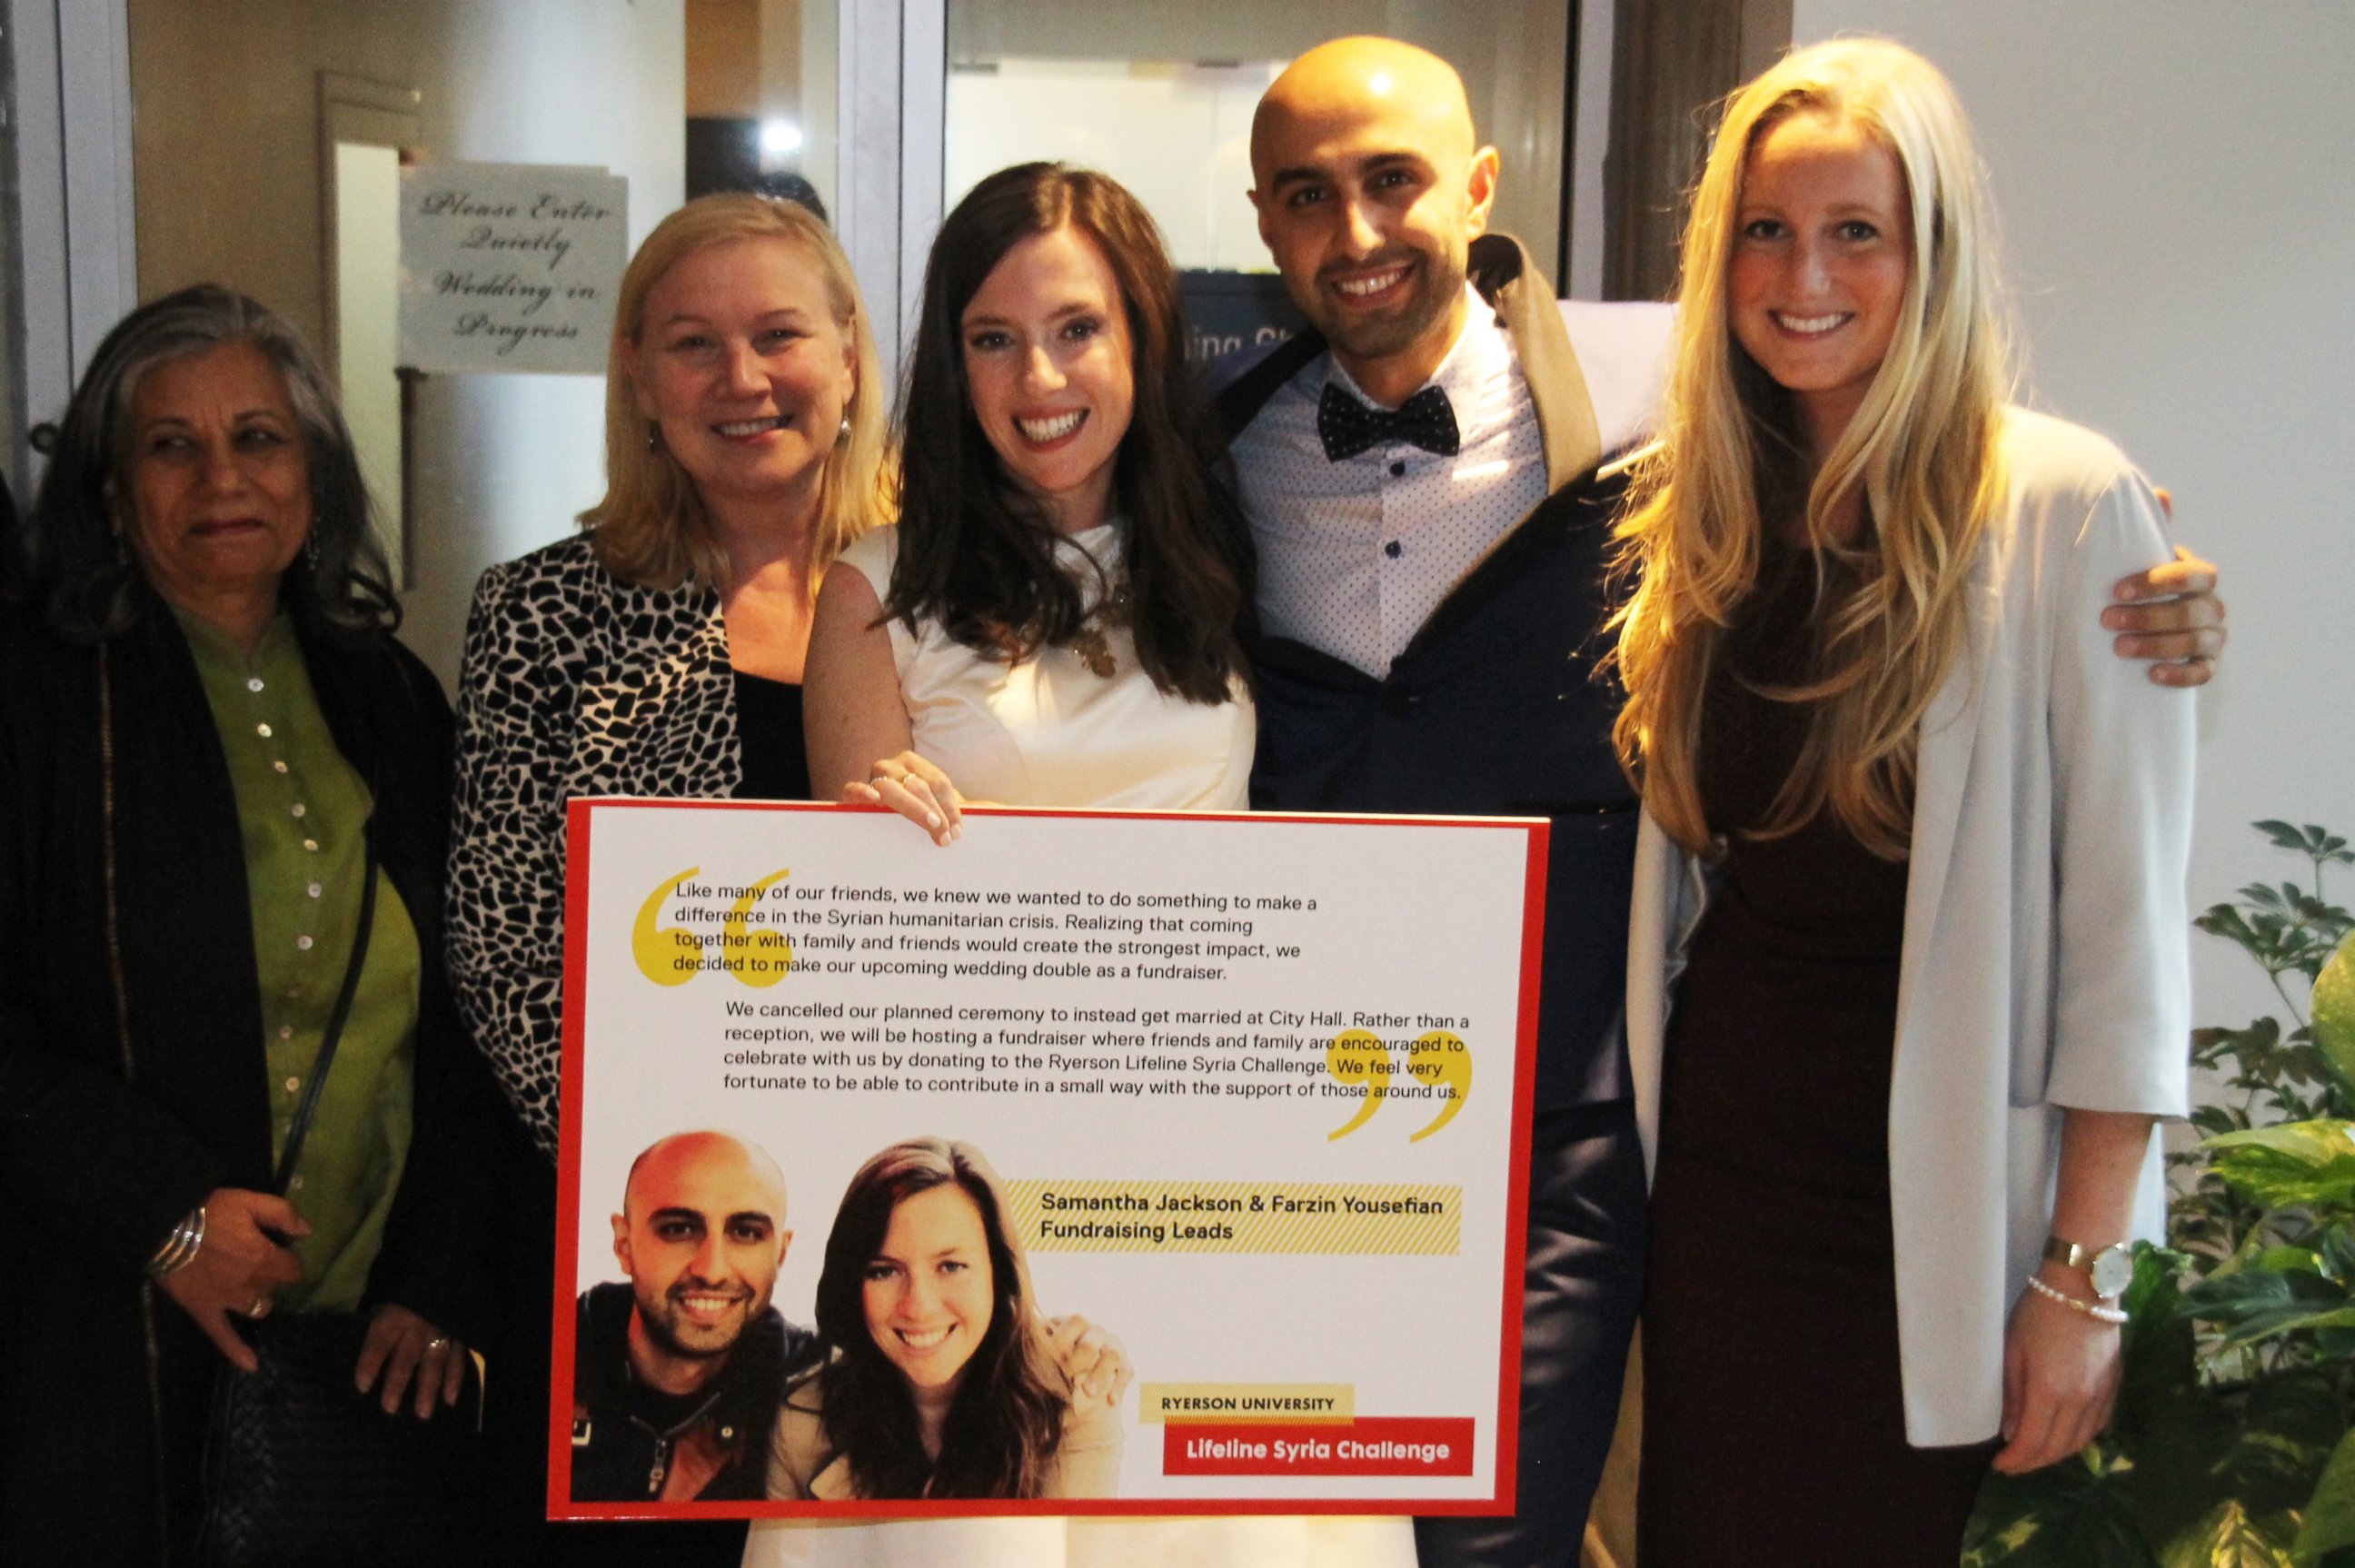 PHOTO:Ryerson University Lifeline Syria Challenge members (L-R) Ratna Omidvar, Wendy Cukier, Samantha Jackson, Farzin Yousefian and Krysten Connely are pictured together here.